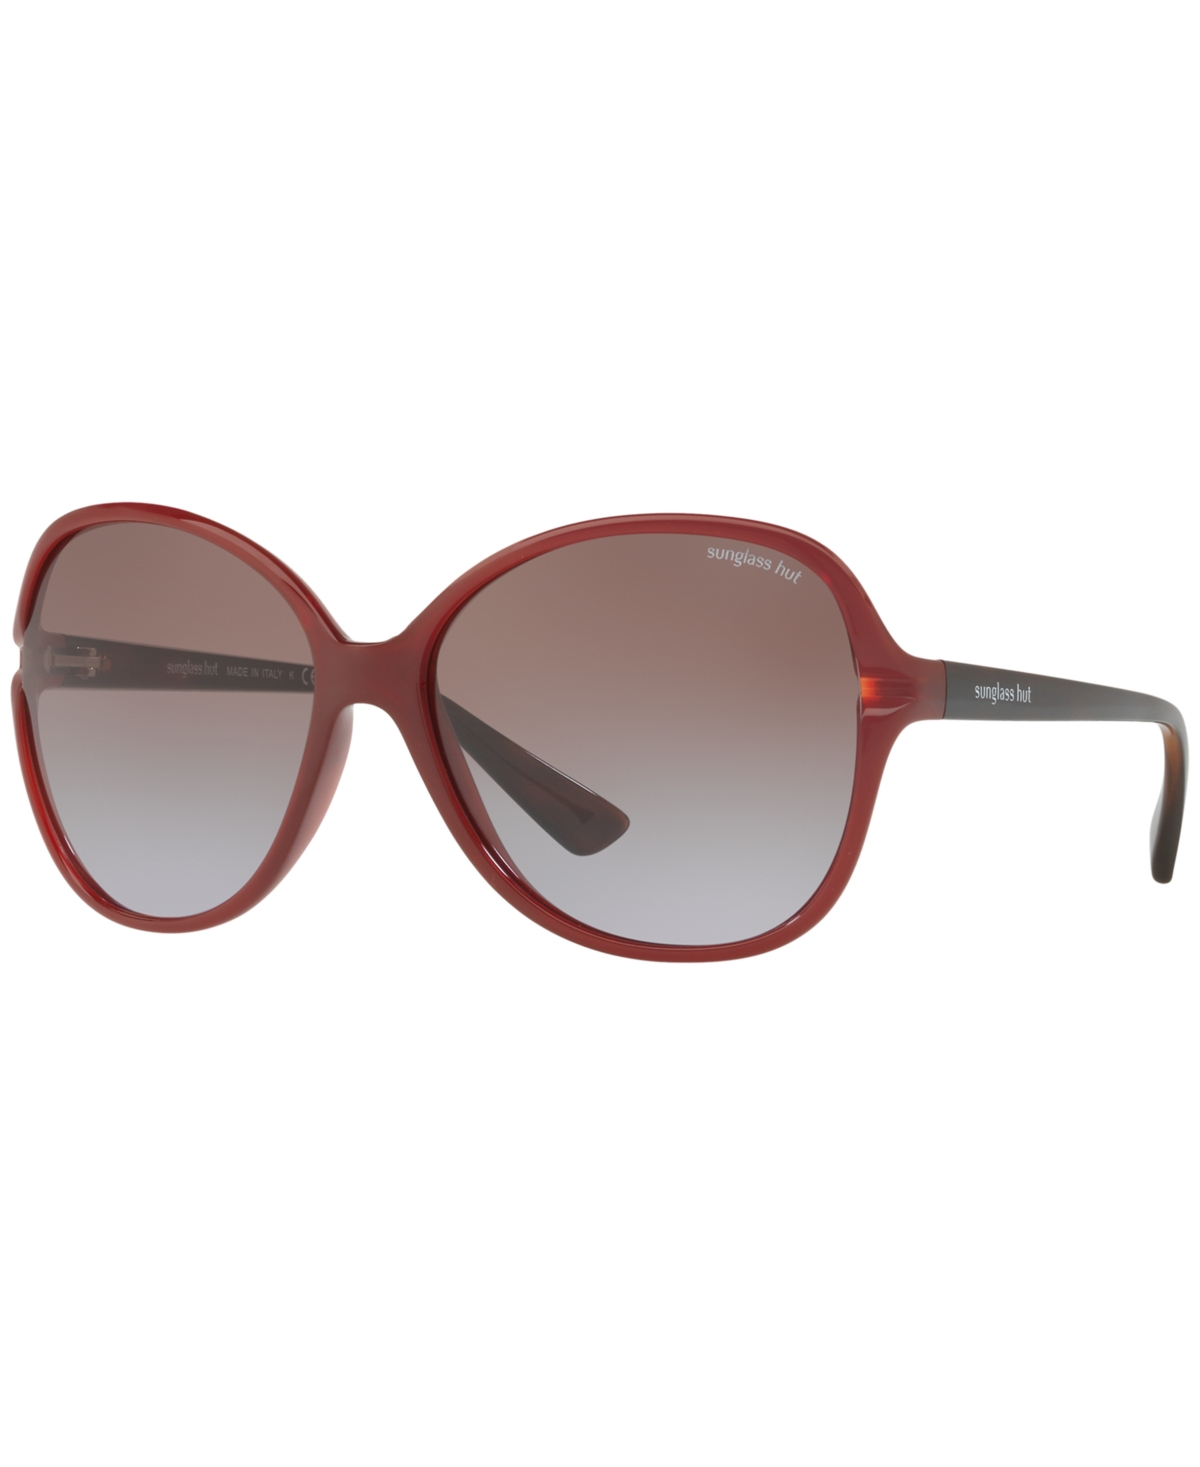 Sunglass Hut Collection Polarized Sunglasses , Hu2001 60 In Red,brown Gradient